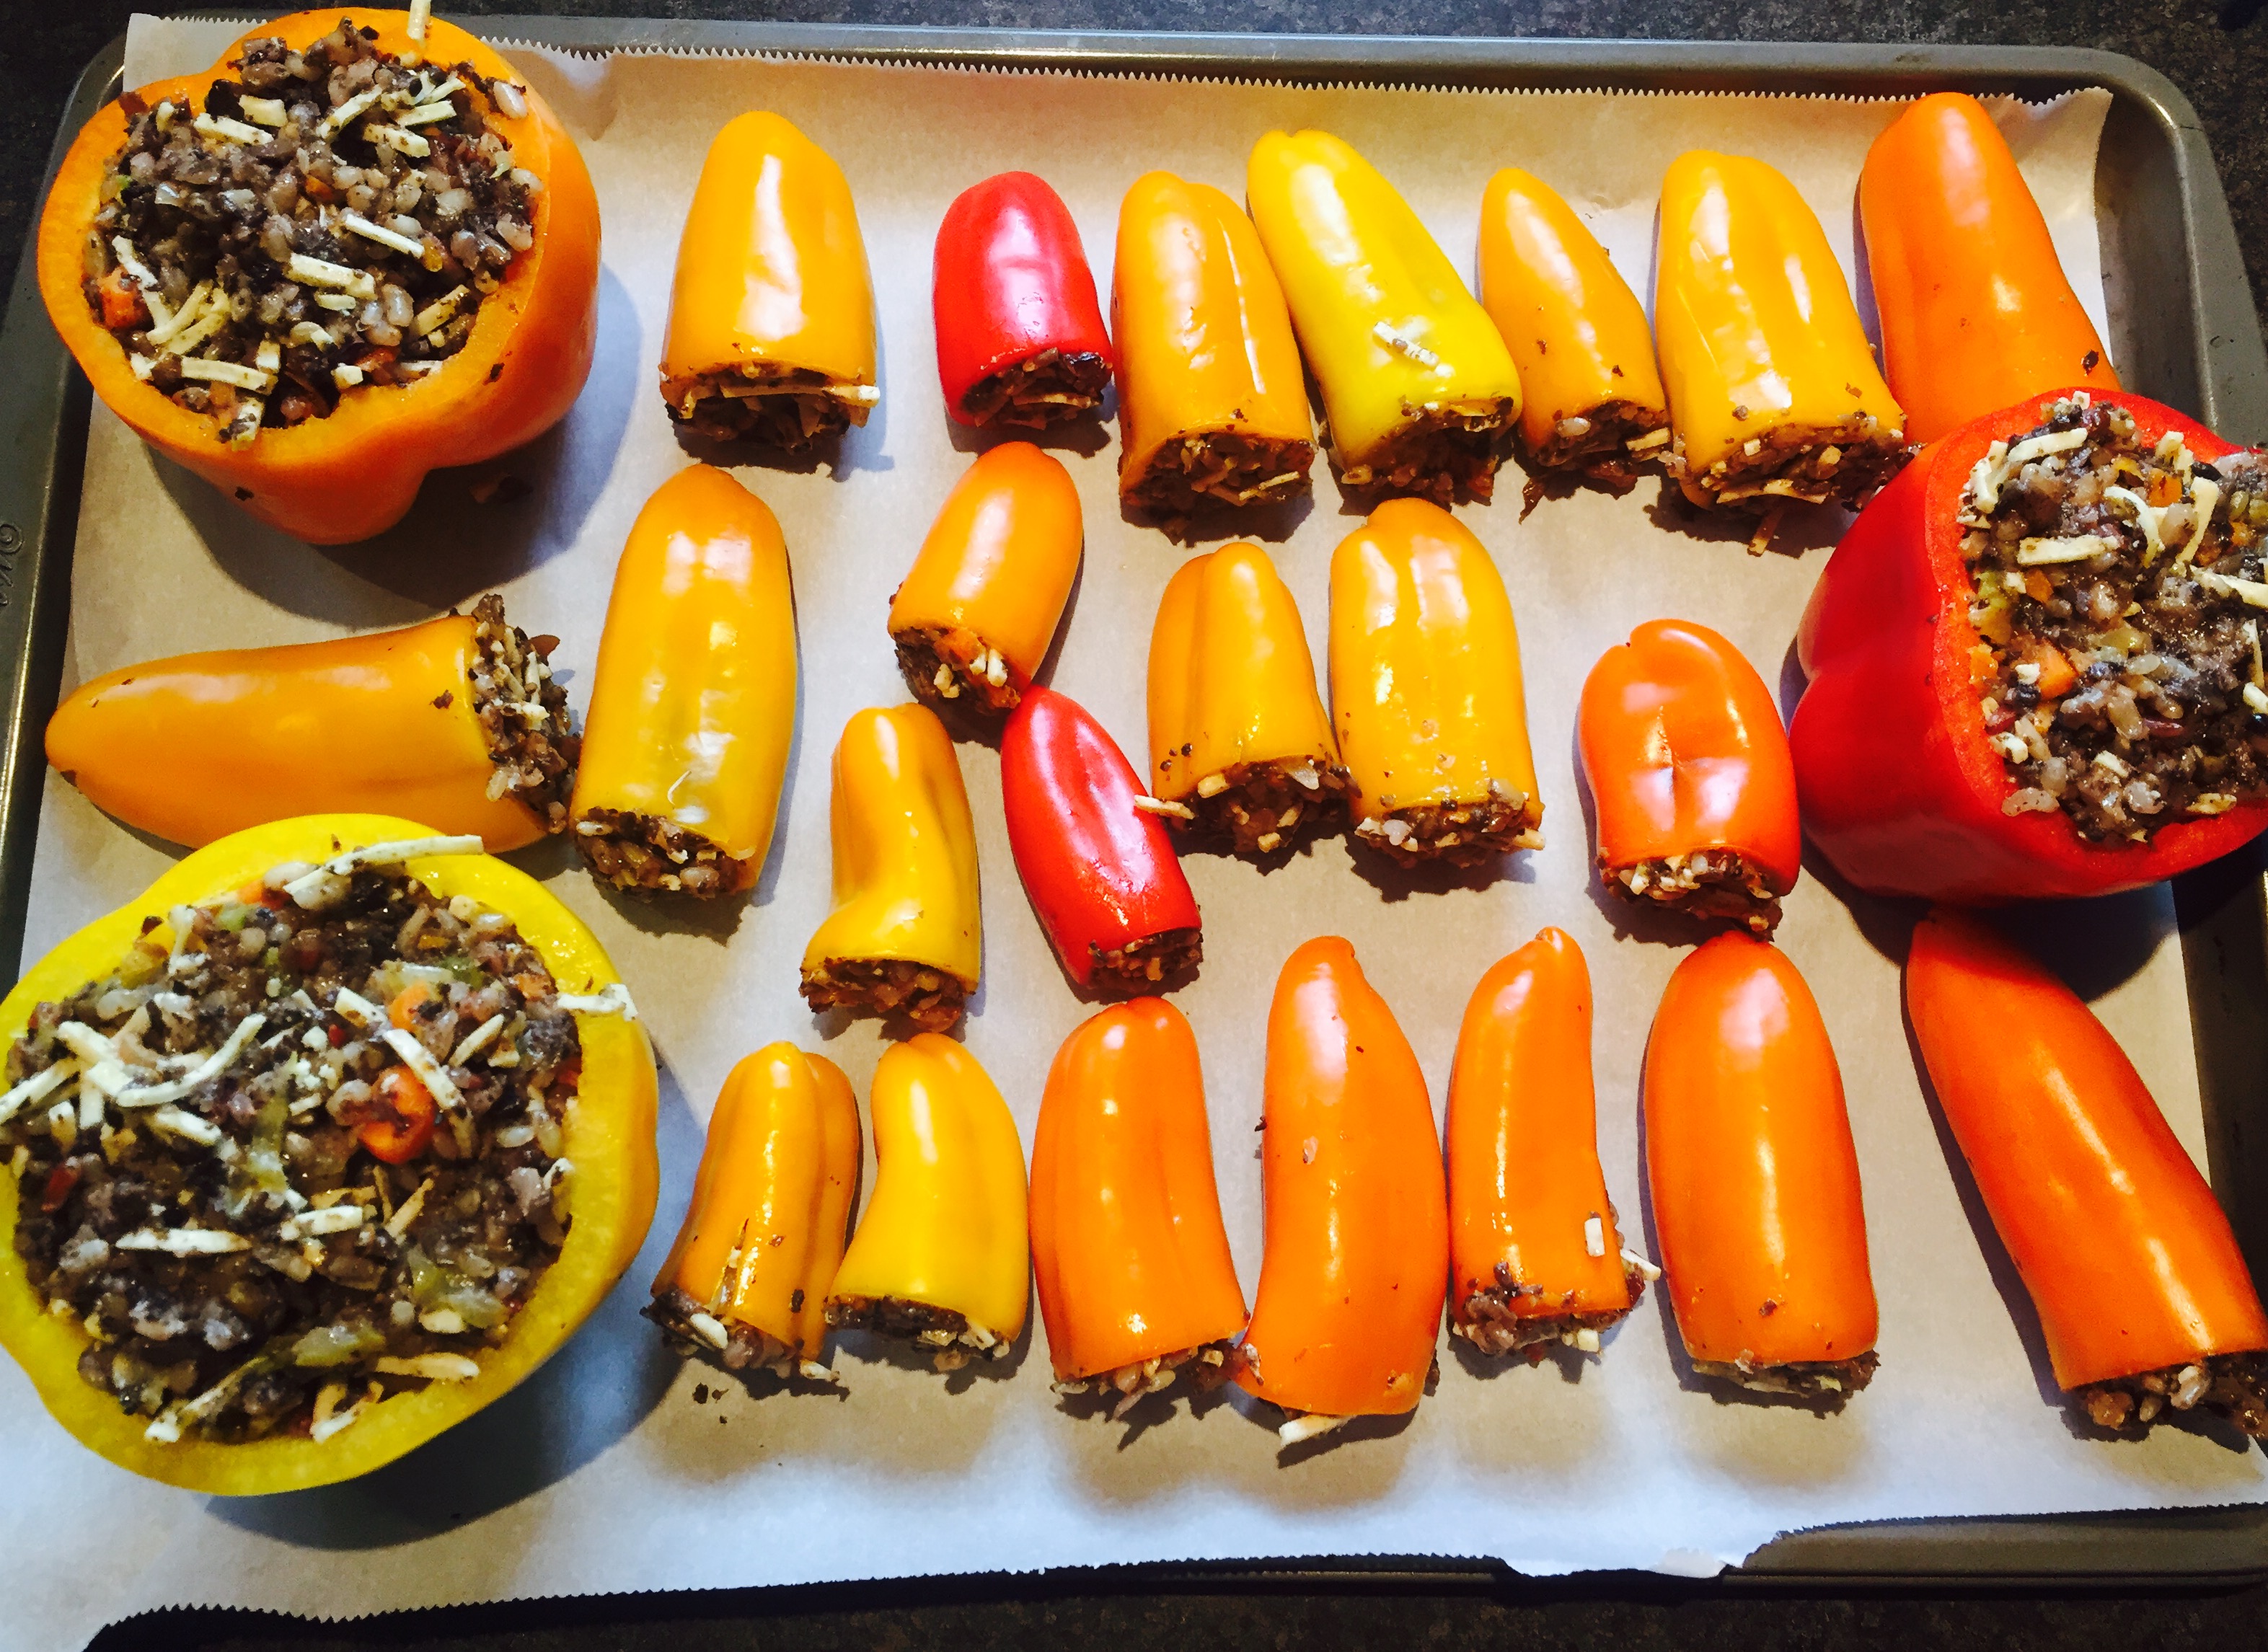 Sweet peppers stuffed with sauteed mushrooms, wild rice, mirepoix and dairy-free cheese